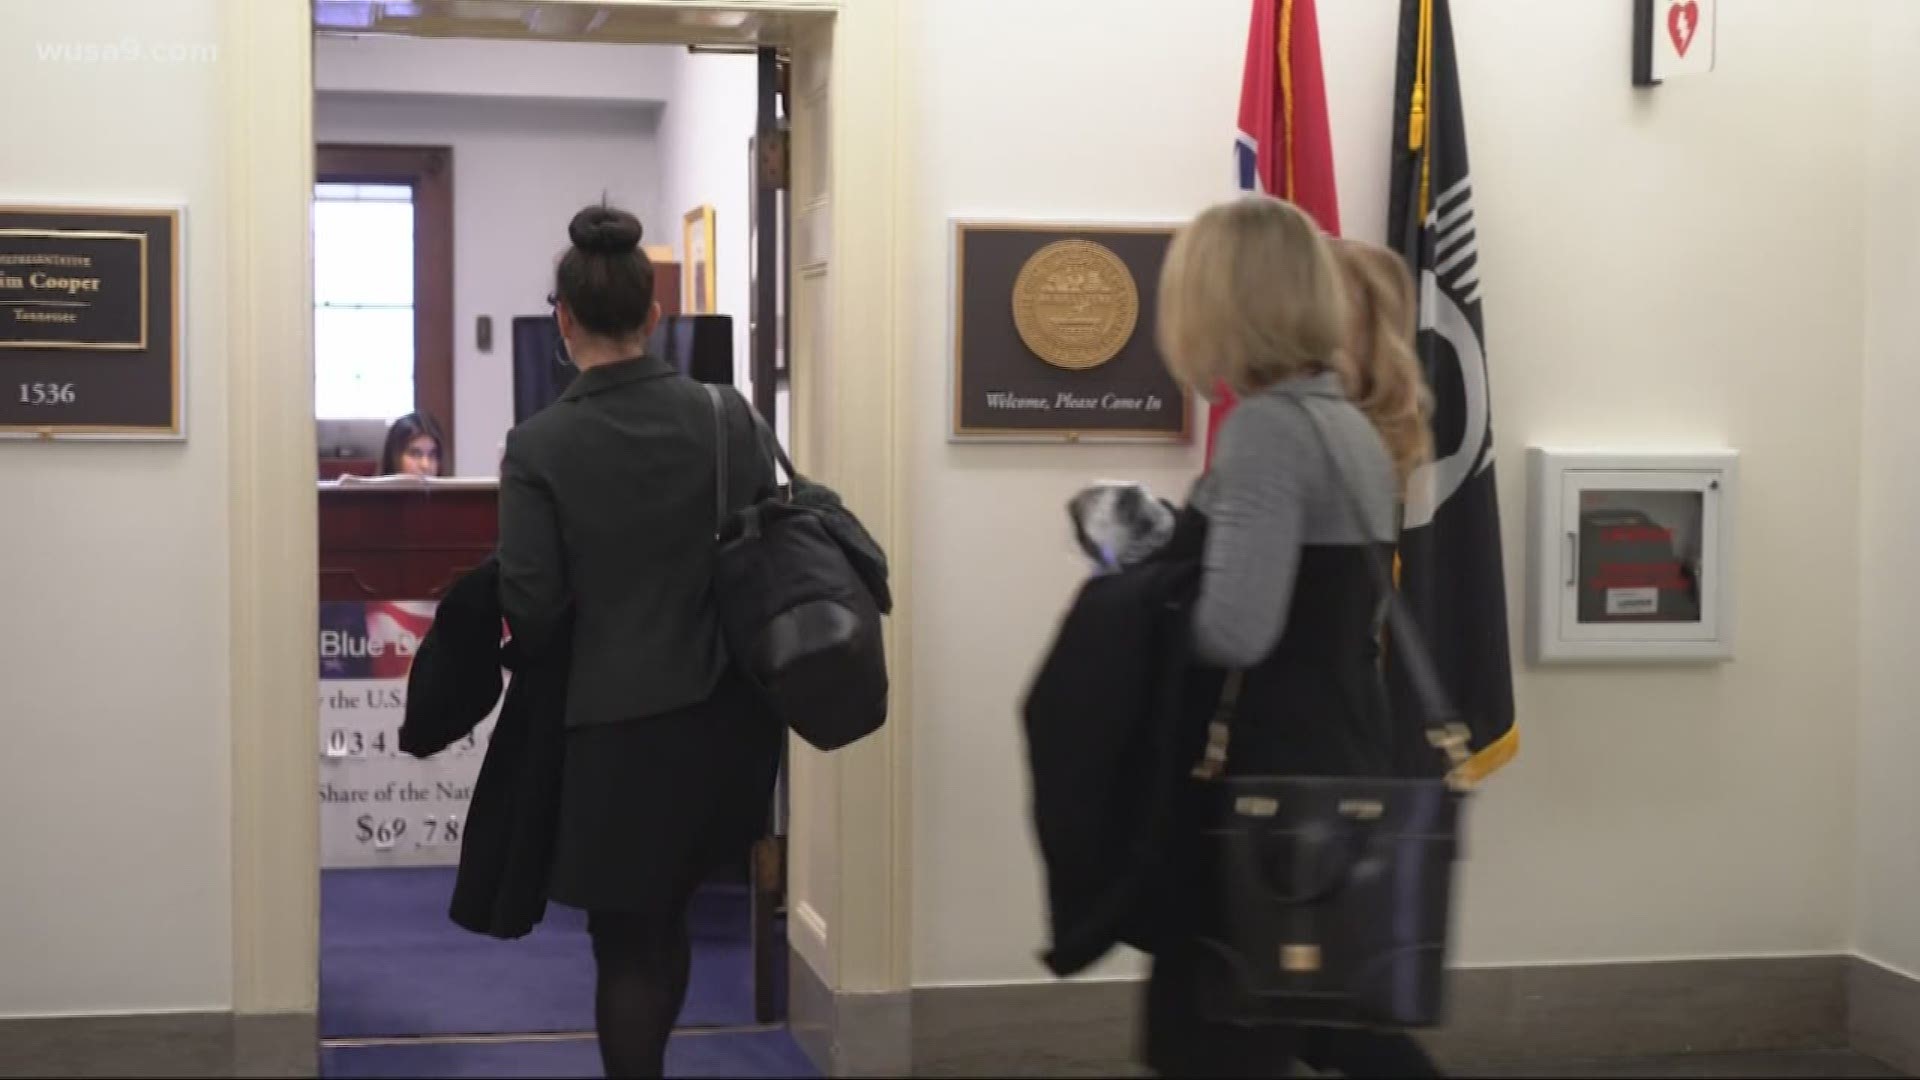 Ahead of hearings in the House and Senate, military families living with dangerous conditions in base housing met with individual lawmakers to plead their cases.